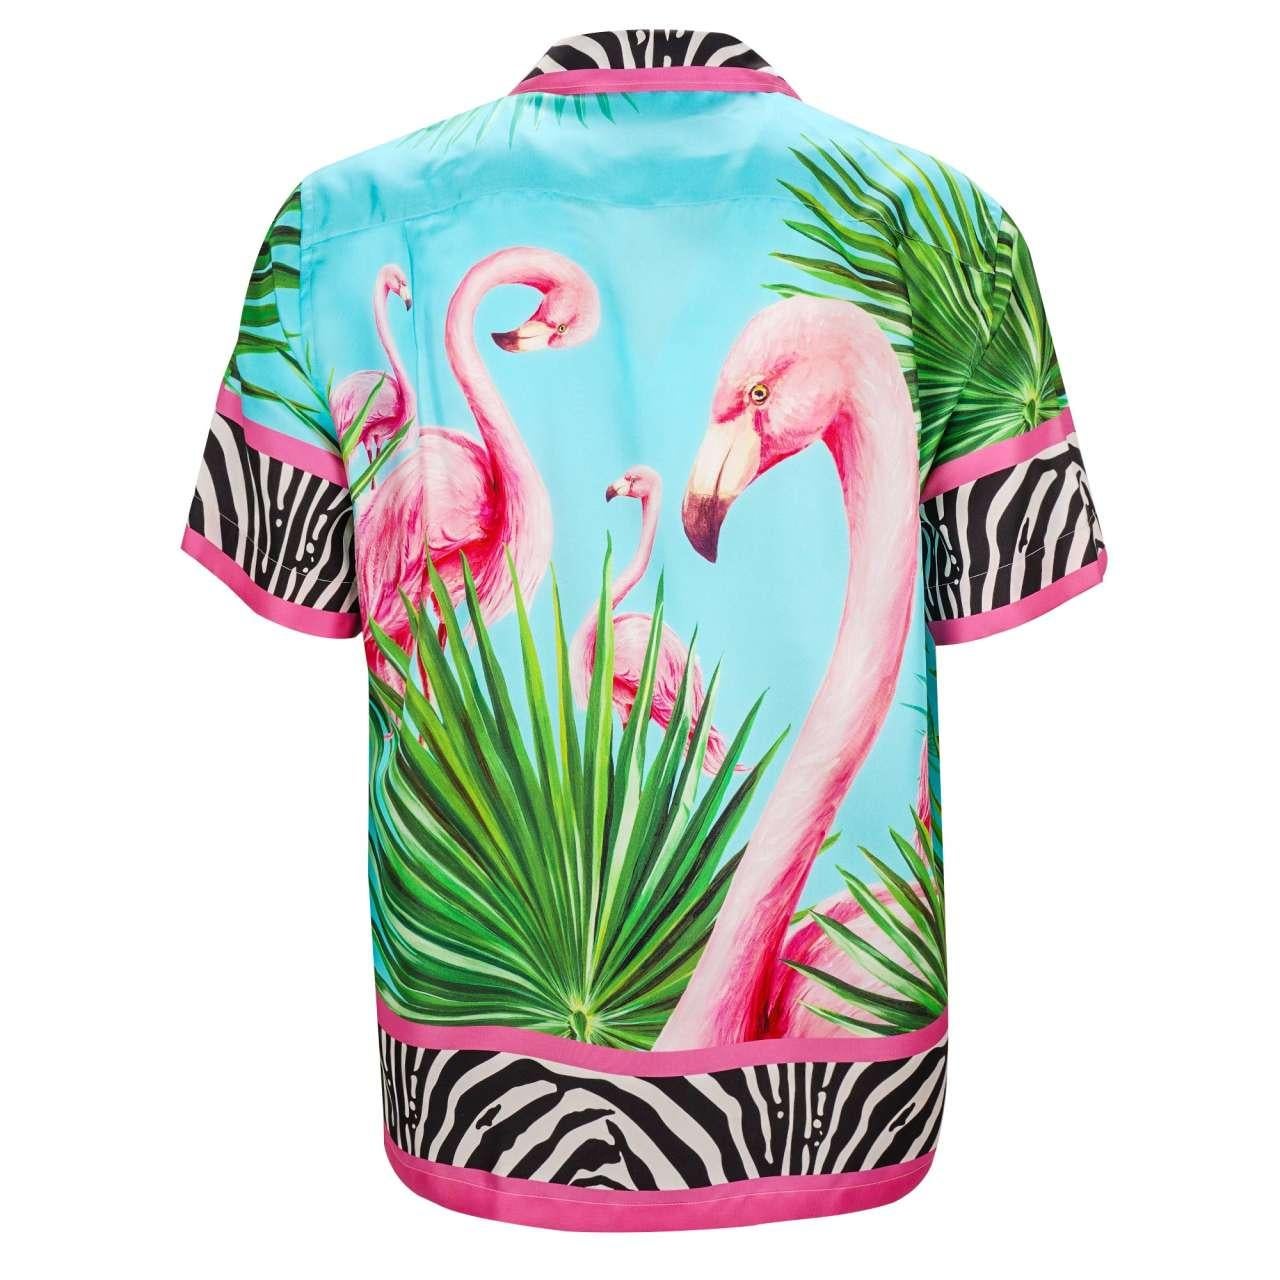 Dolce & Gabbana - DJ Khaled Silk Flamingo Zebra Shirt with Sunglasses and CD 43 In Excellent Condition For Sale In Erkrath, DE